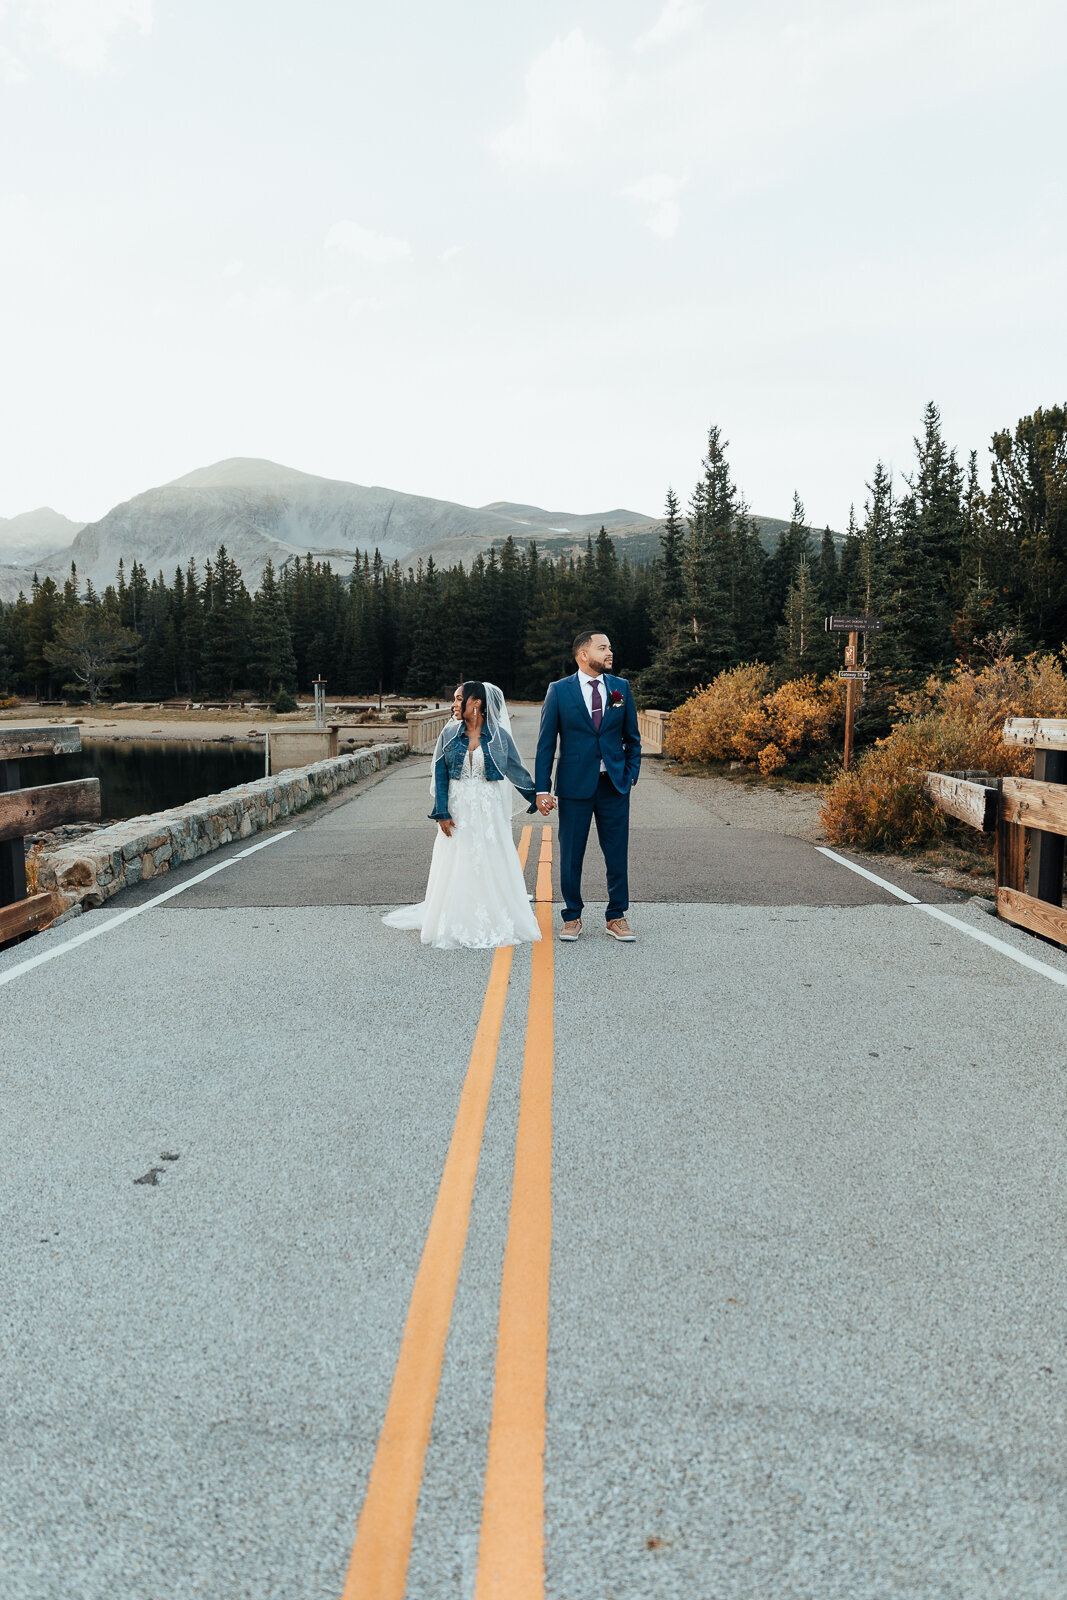 Colorado elopement photographer Jessica Margaret is ditching the traditional to document the one-of-a-kind!